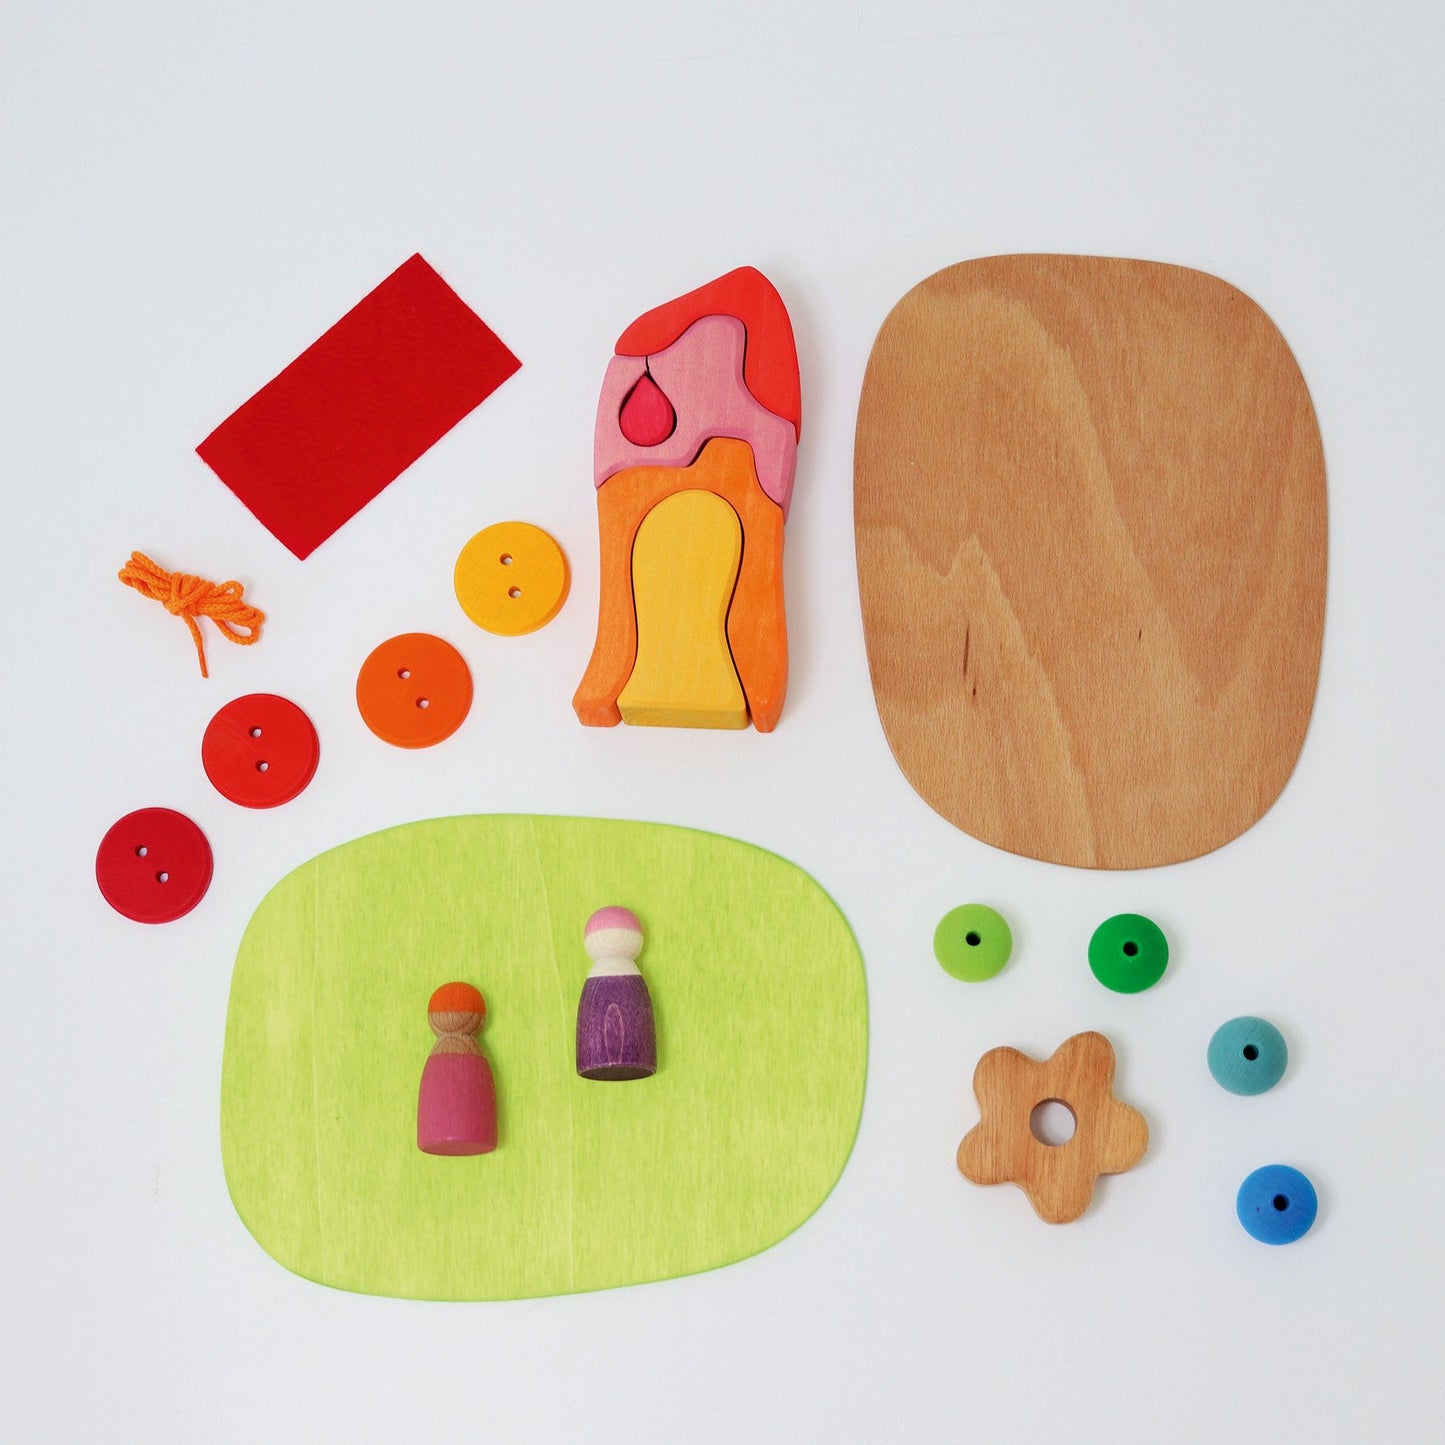 Play Down by the Meadow | Small World Playset | Wooden Toys for Kids | Open-Ended Play